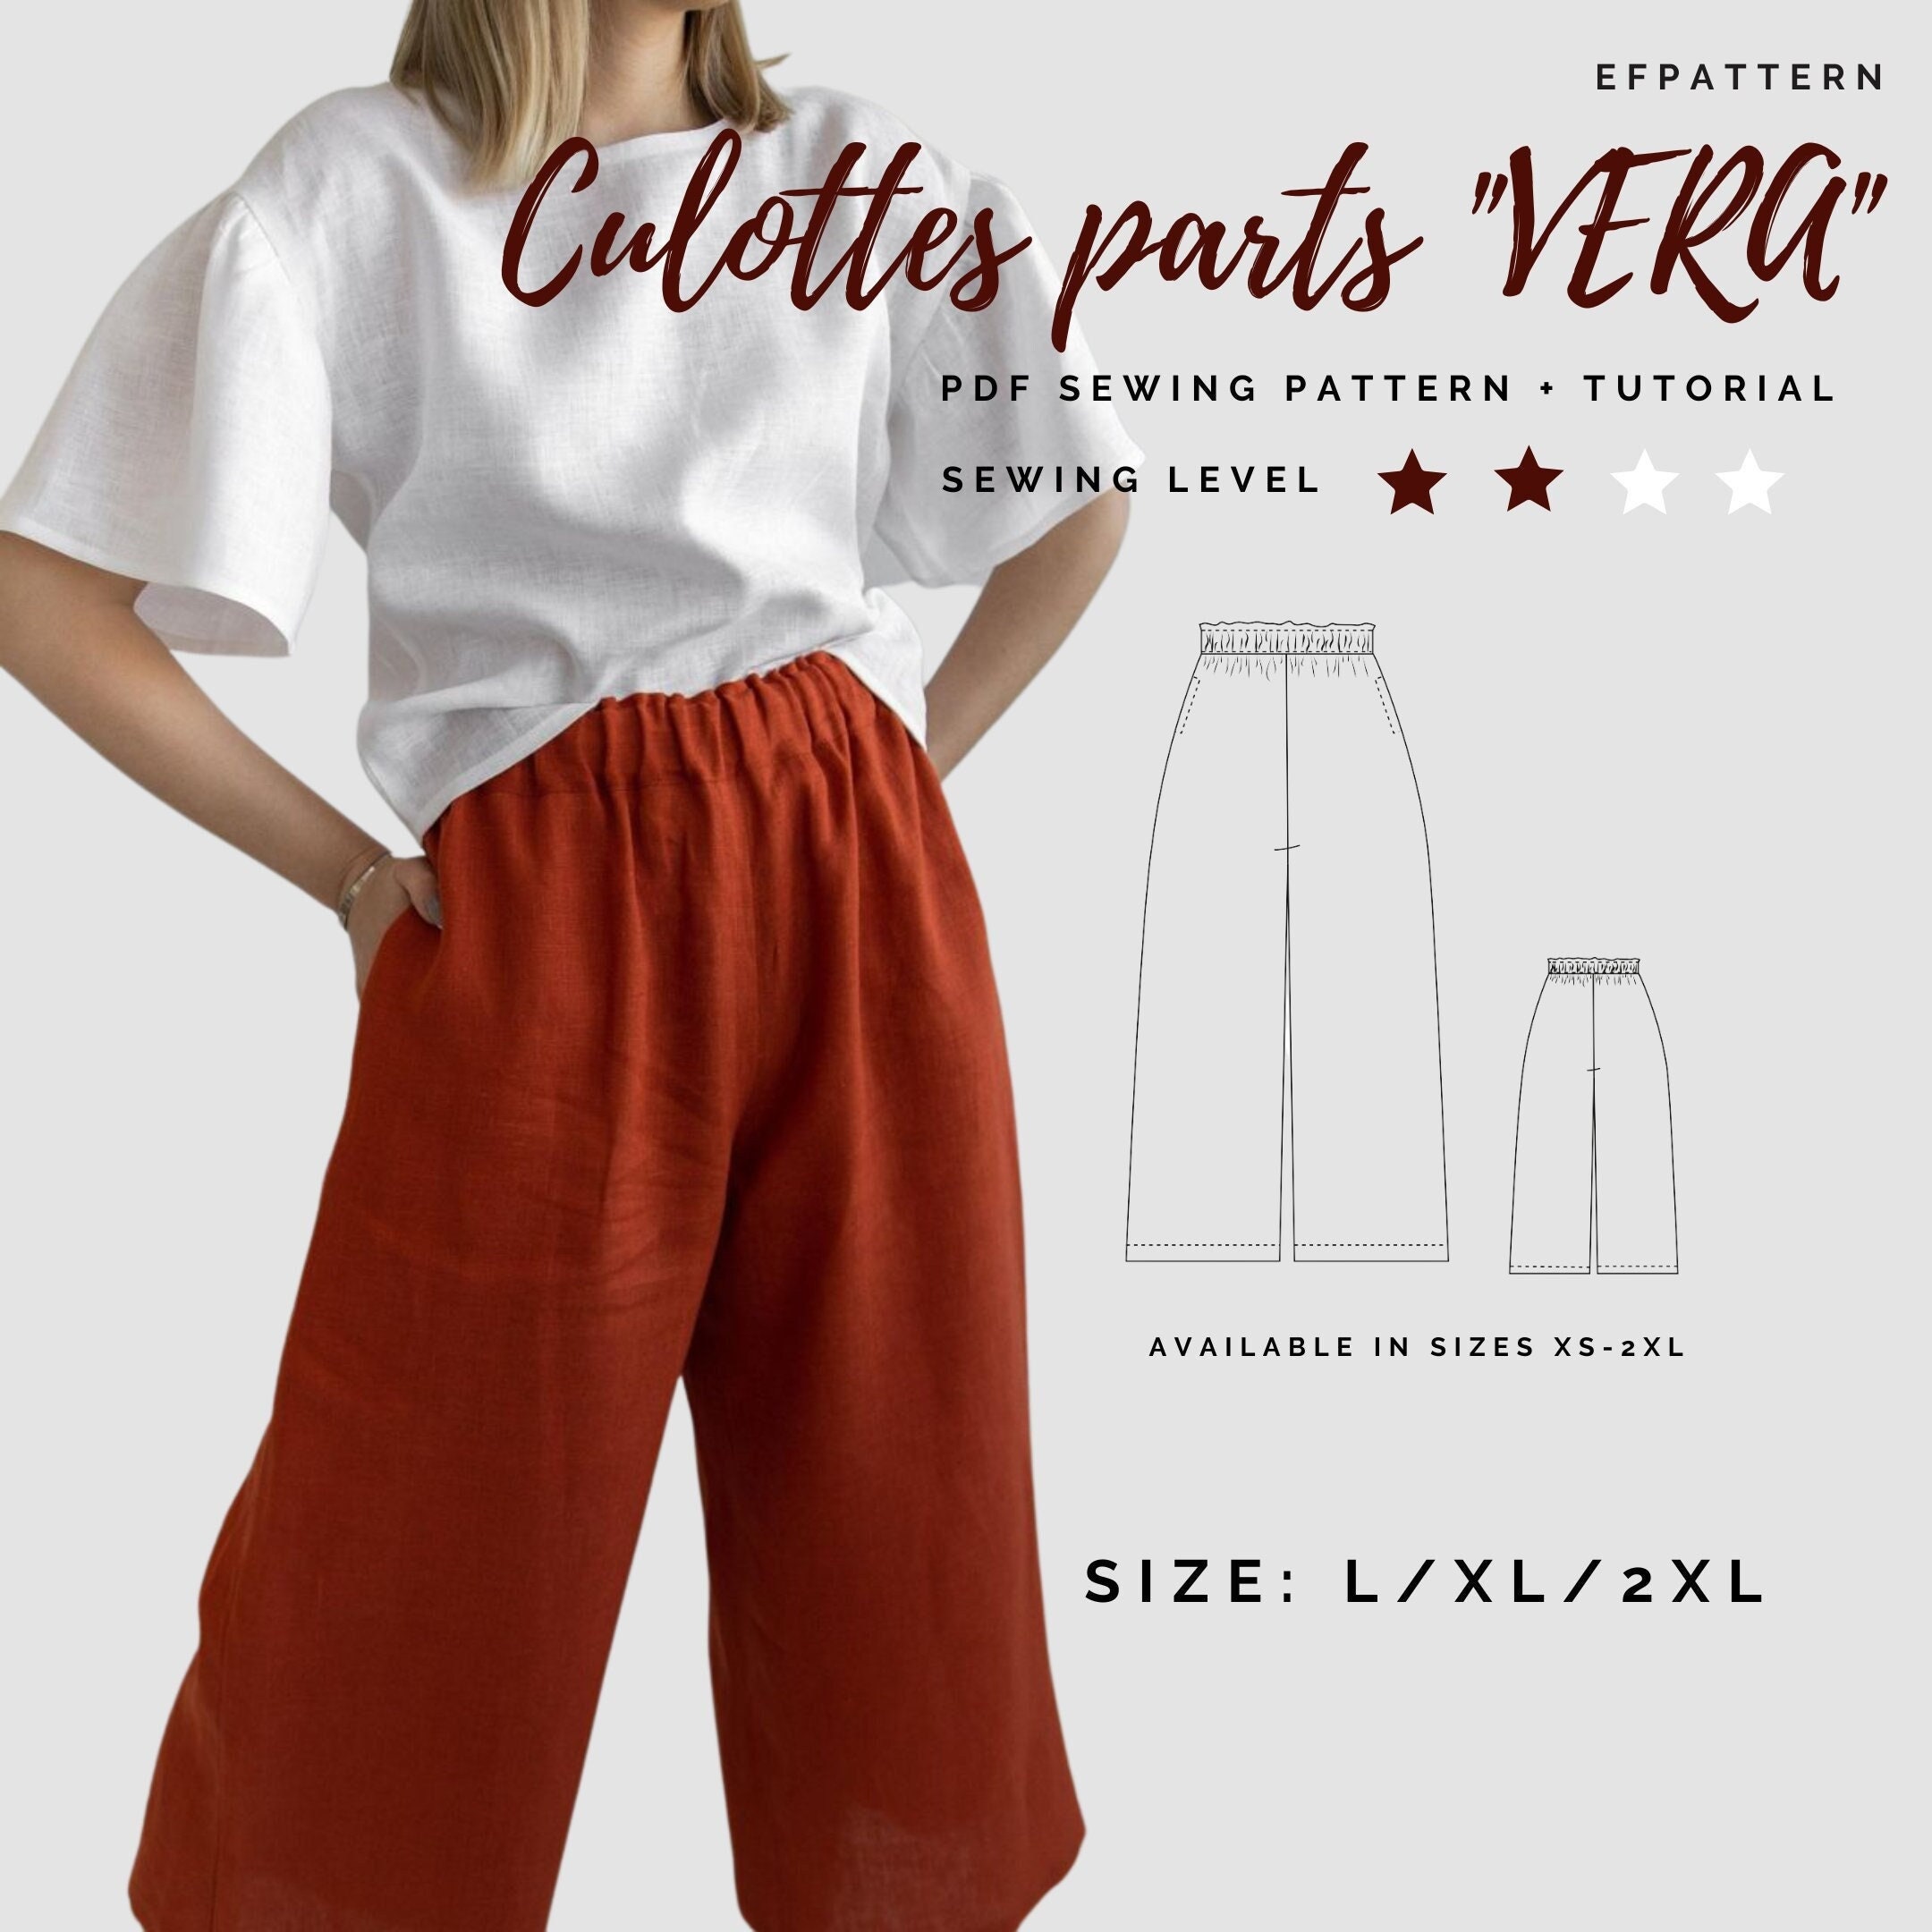 PDF Sewing Pattern of Wide Leg High Waisted Pants, Brandy Digital Pattern  Sizes XS-2XL Instructions & Video Tutorial, Instant Download -  Canada